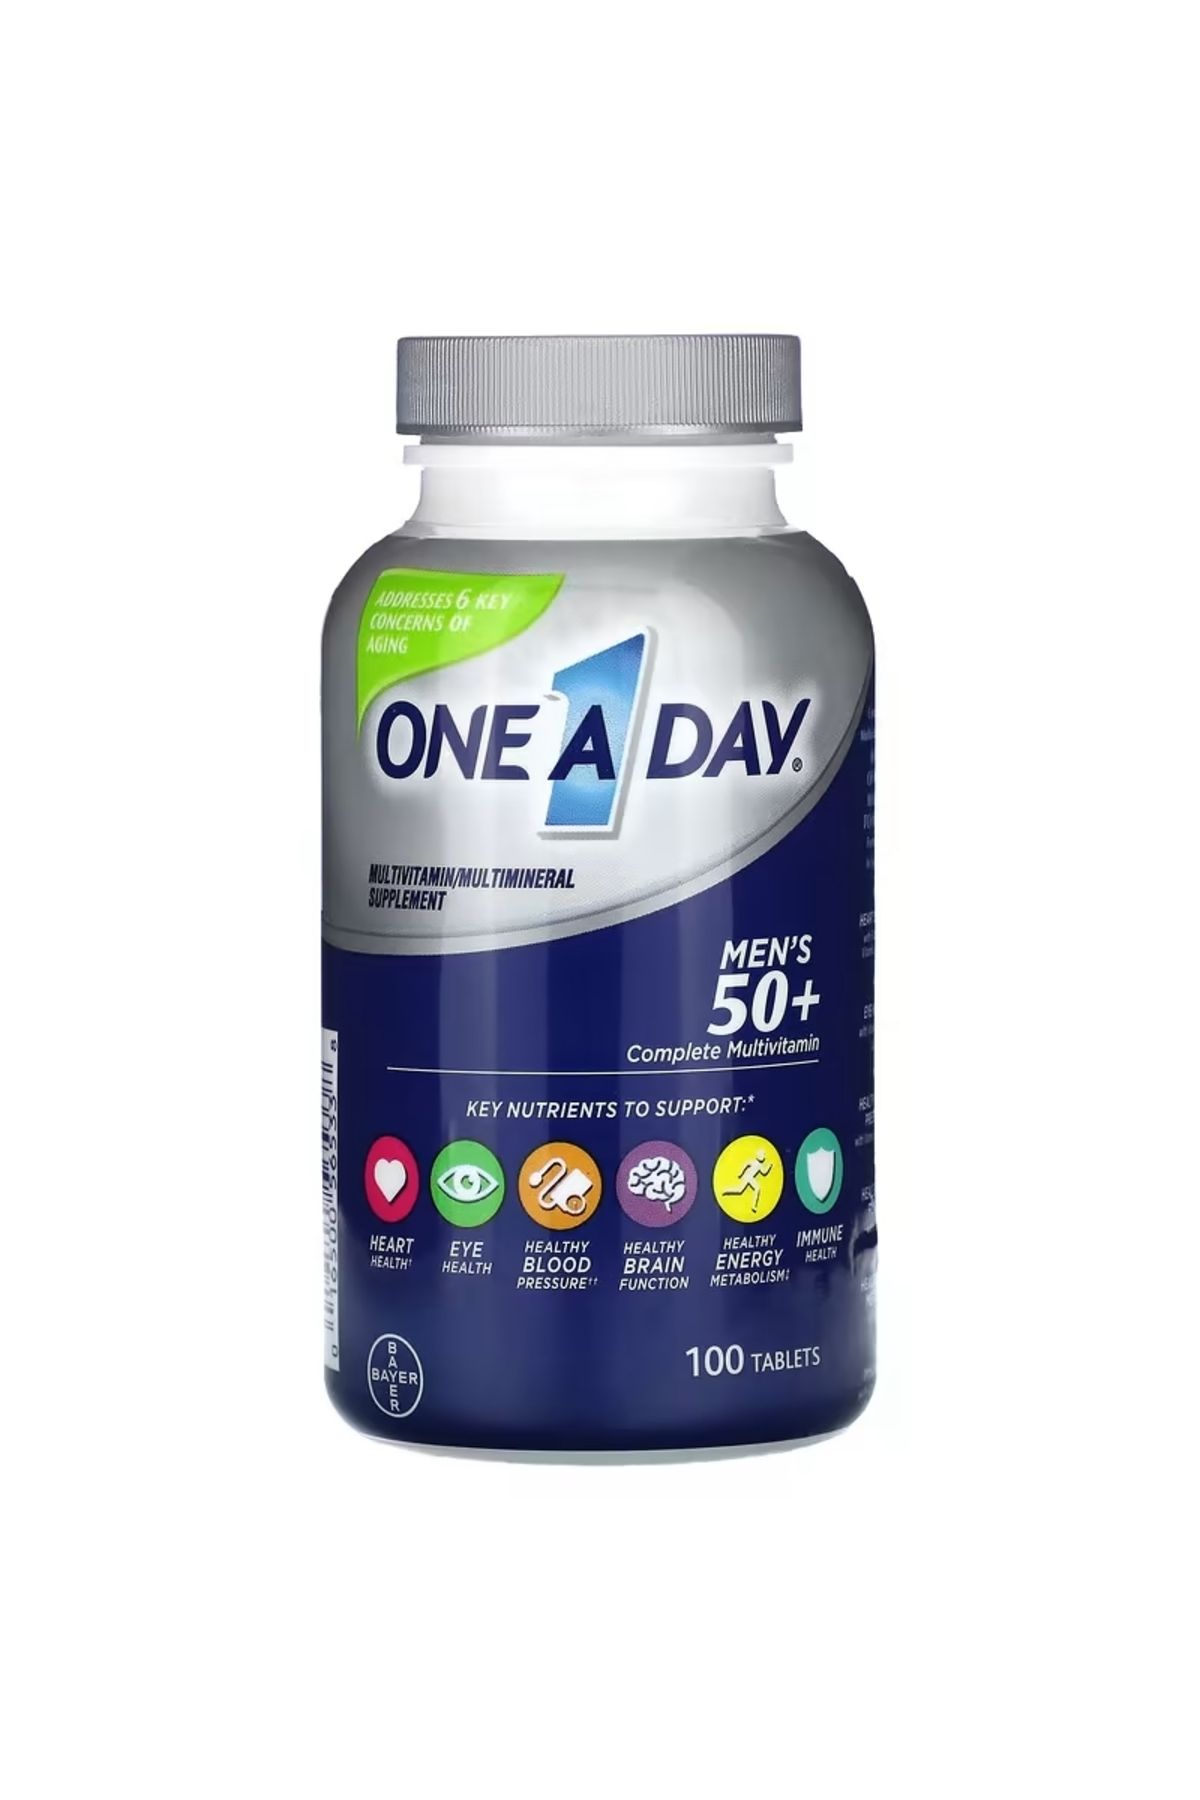 Bayer One A Day Men's 50+ Multivitamin 100 Tablets